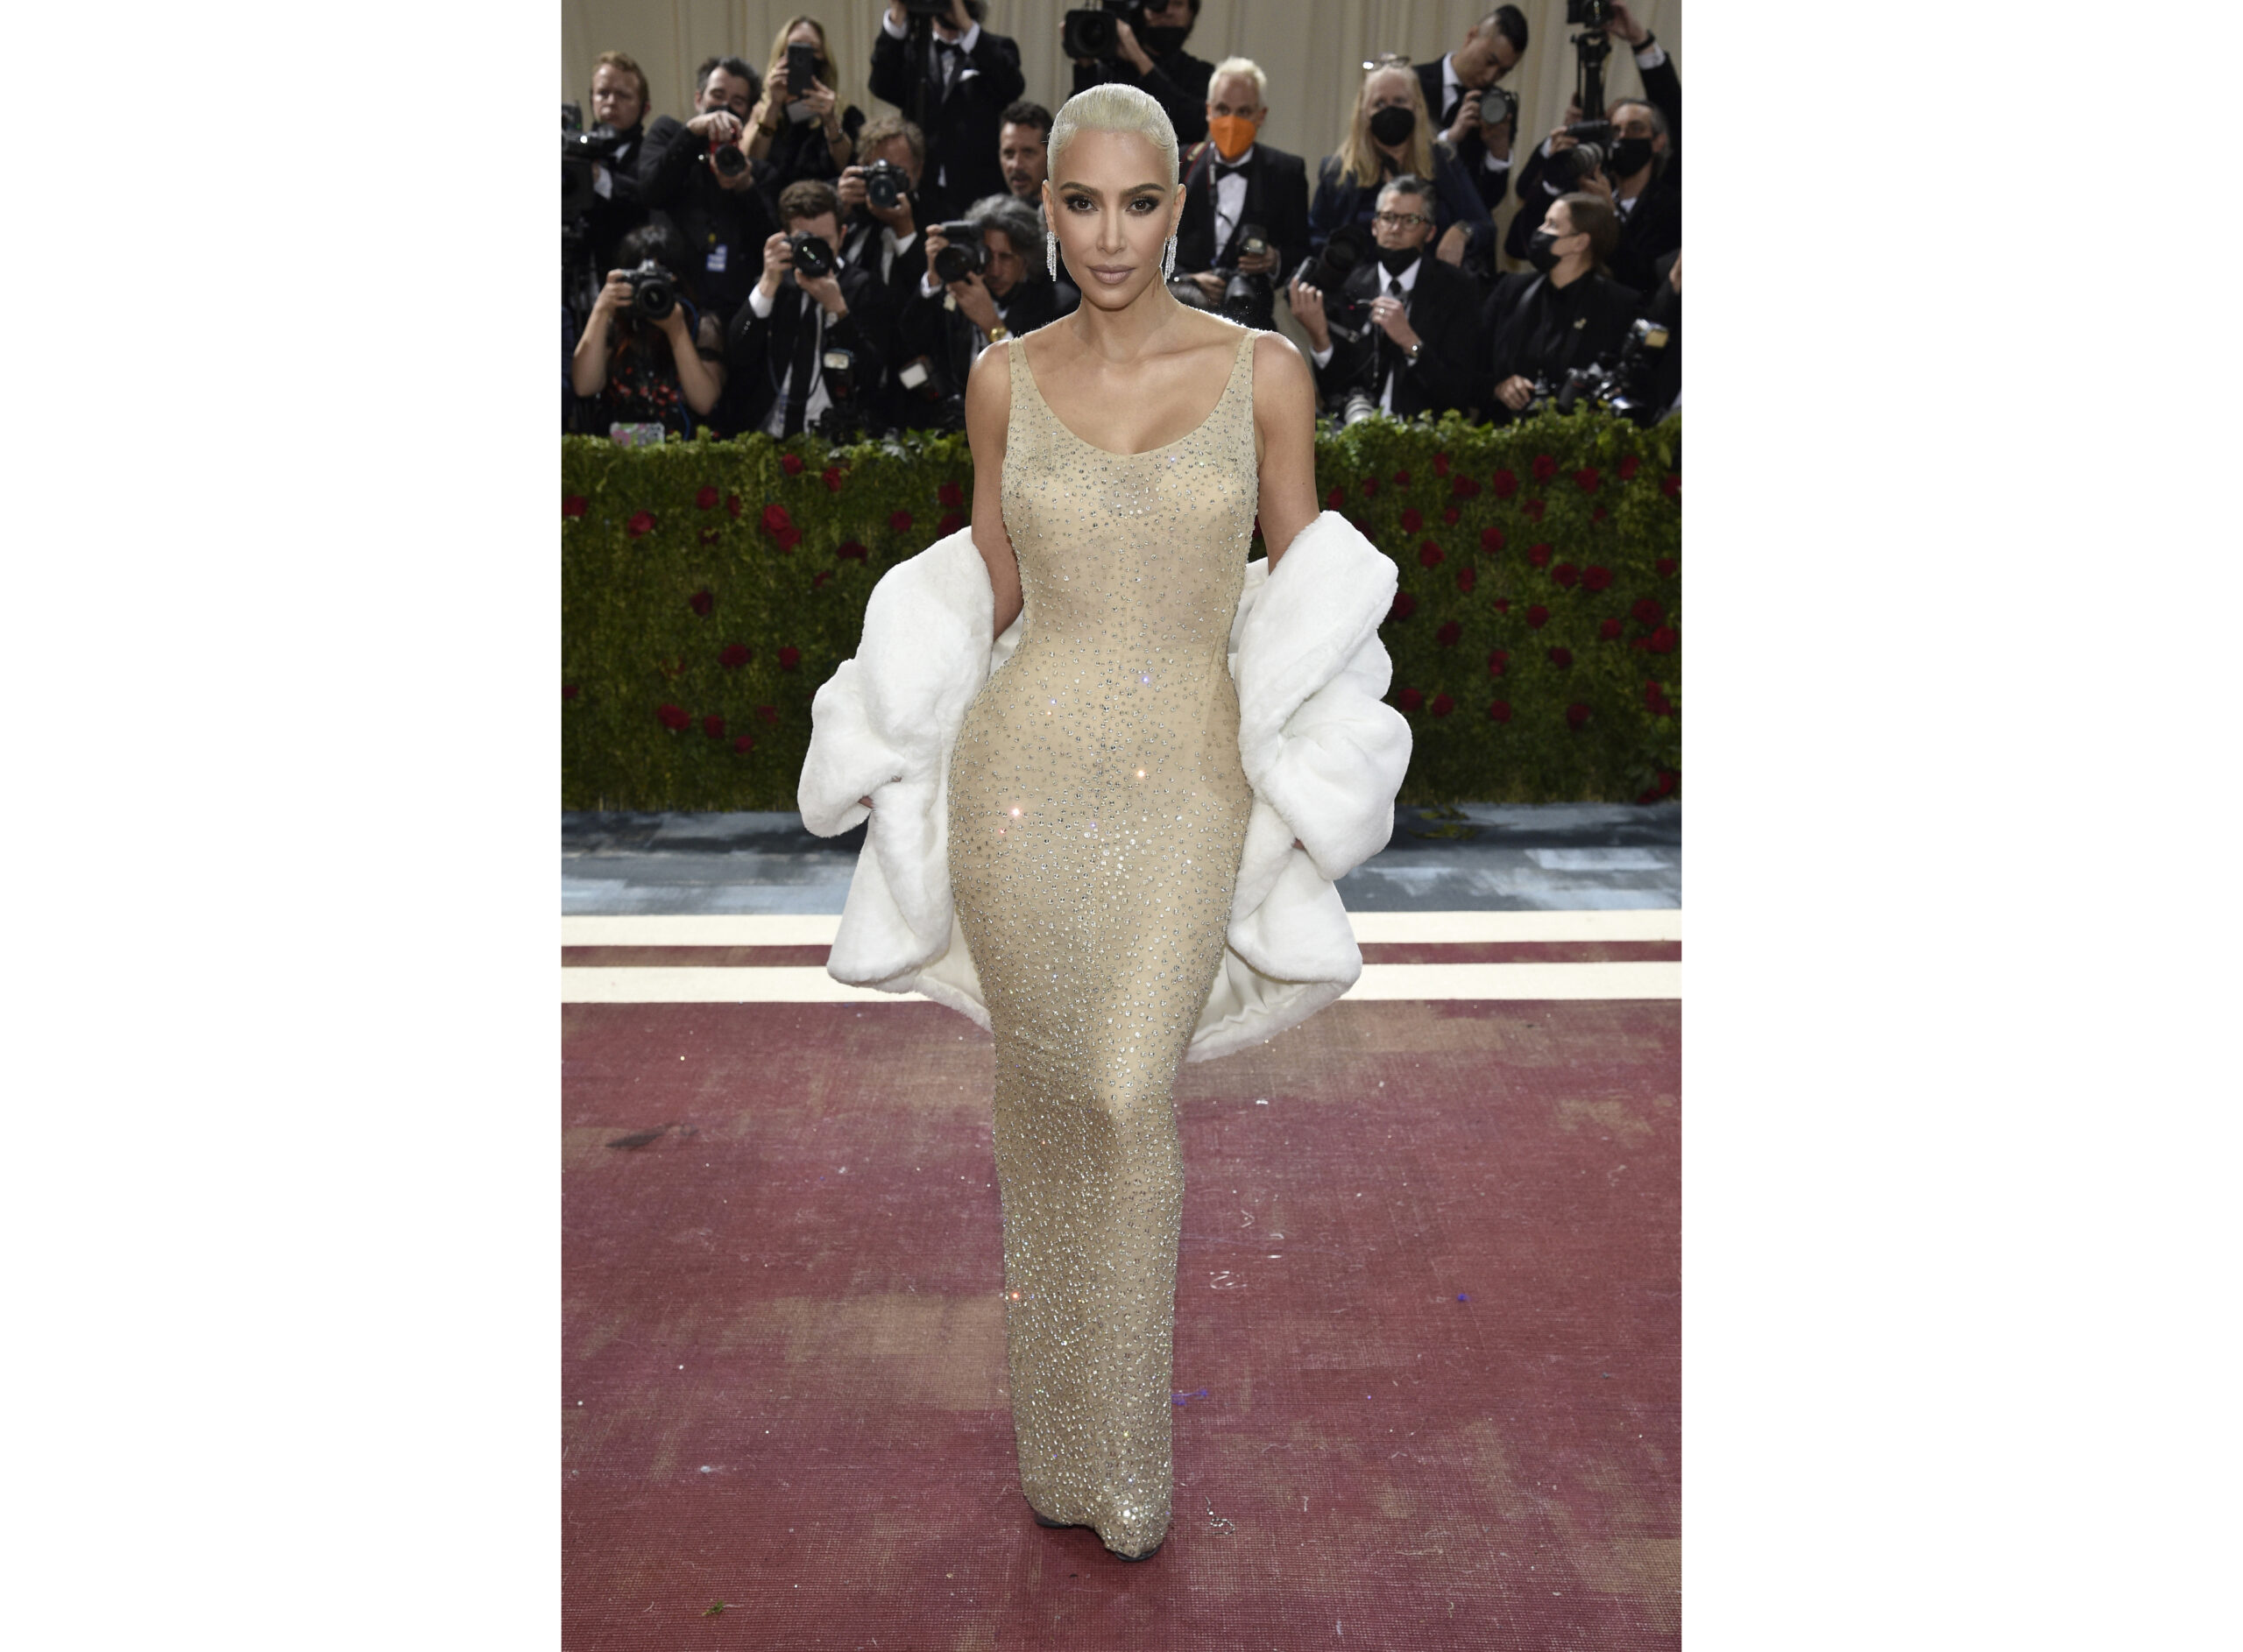 FILE - Kim Kardashian wears the iconic dress worn by Marilyn Monroe at The Metropolitan Museum of Art's Costume Institute benefit gala in New York on May 2, 2022. Some Monroe enthusiasts believe the dress was damaged after Kardashian wore it but the Ripley’s Believe It or Not! attraction in Hollywood, Calif., where the garment is on display, denies that claim. (Photo by Evan Agostini/Invision/AP, File)